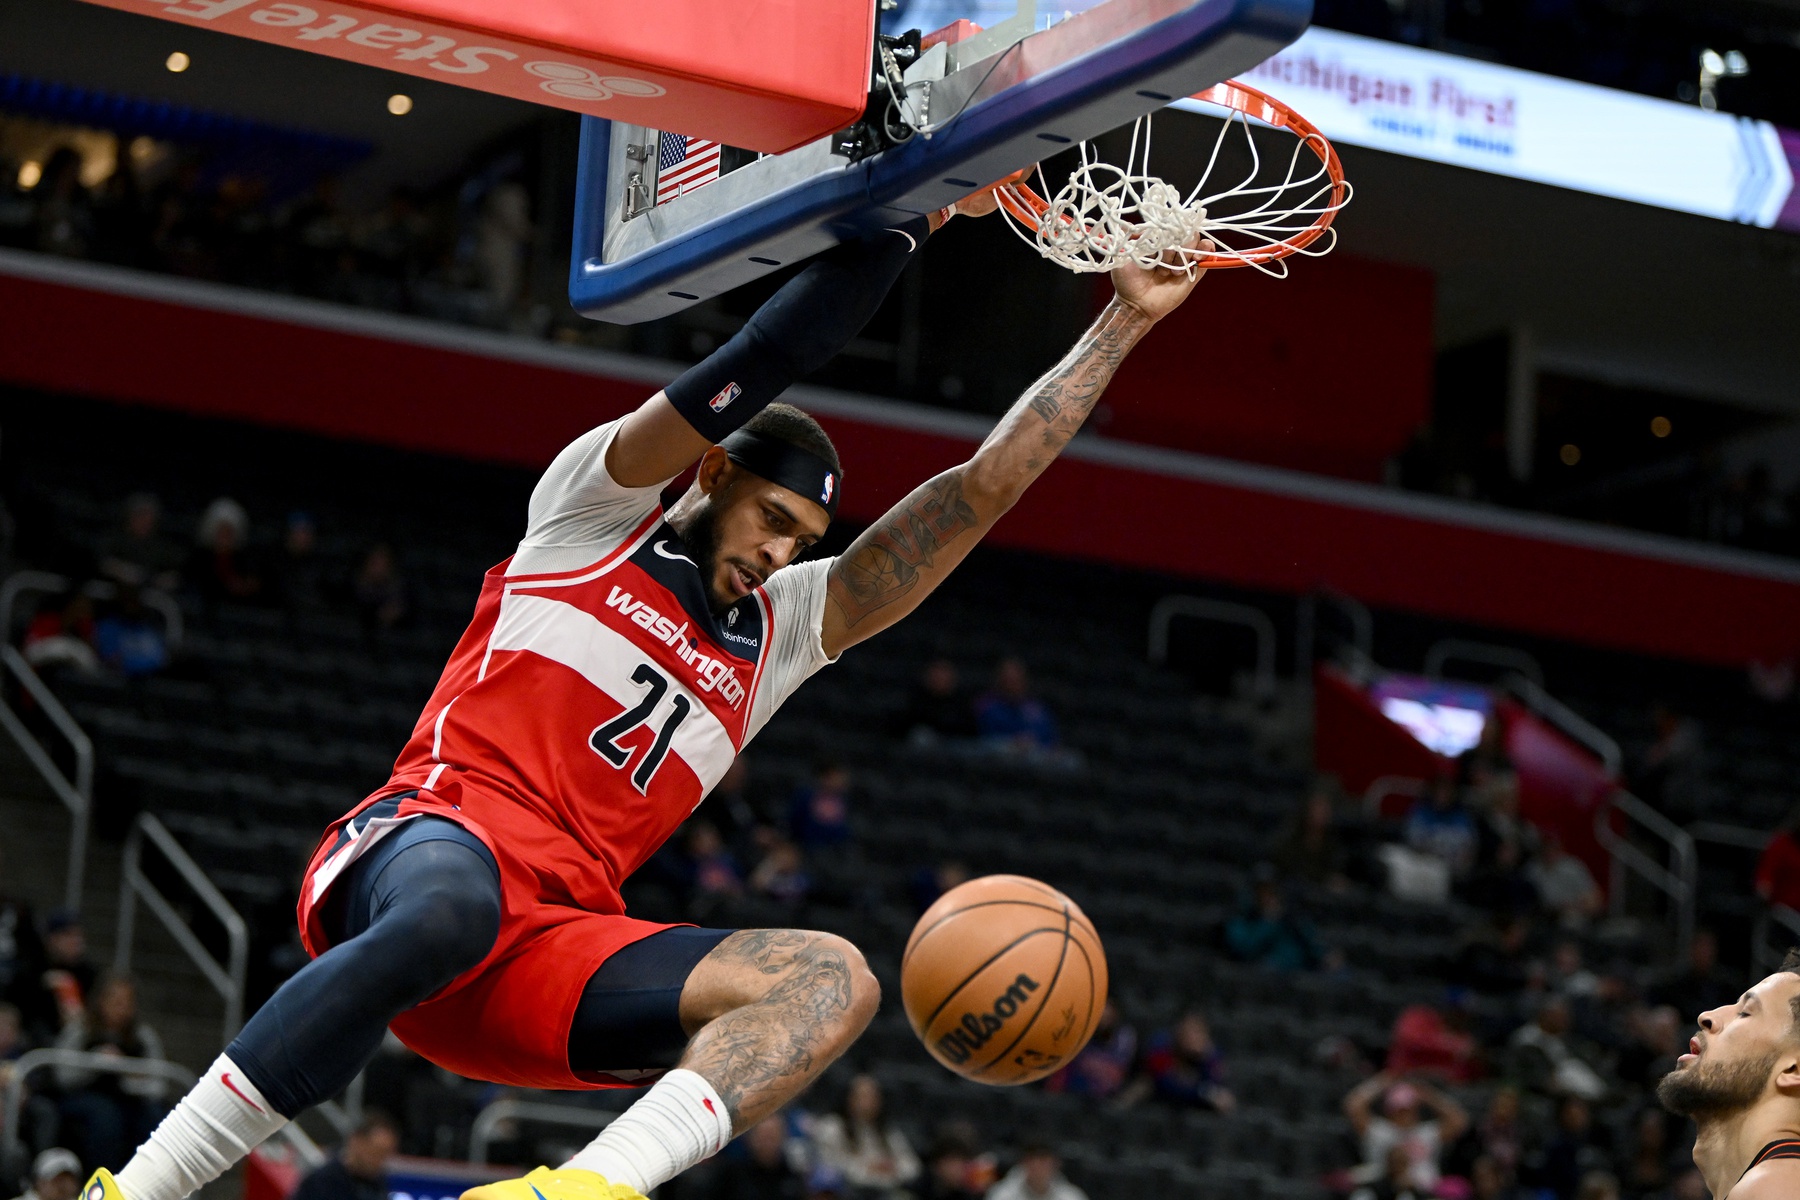 Washington Wizards center Daniel Gafford (21) dunks the ball against the Detroit Pistons in the third quarter at Little Caesars Arena.